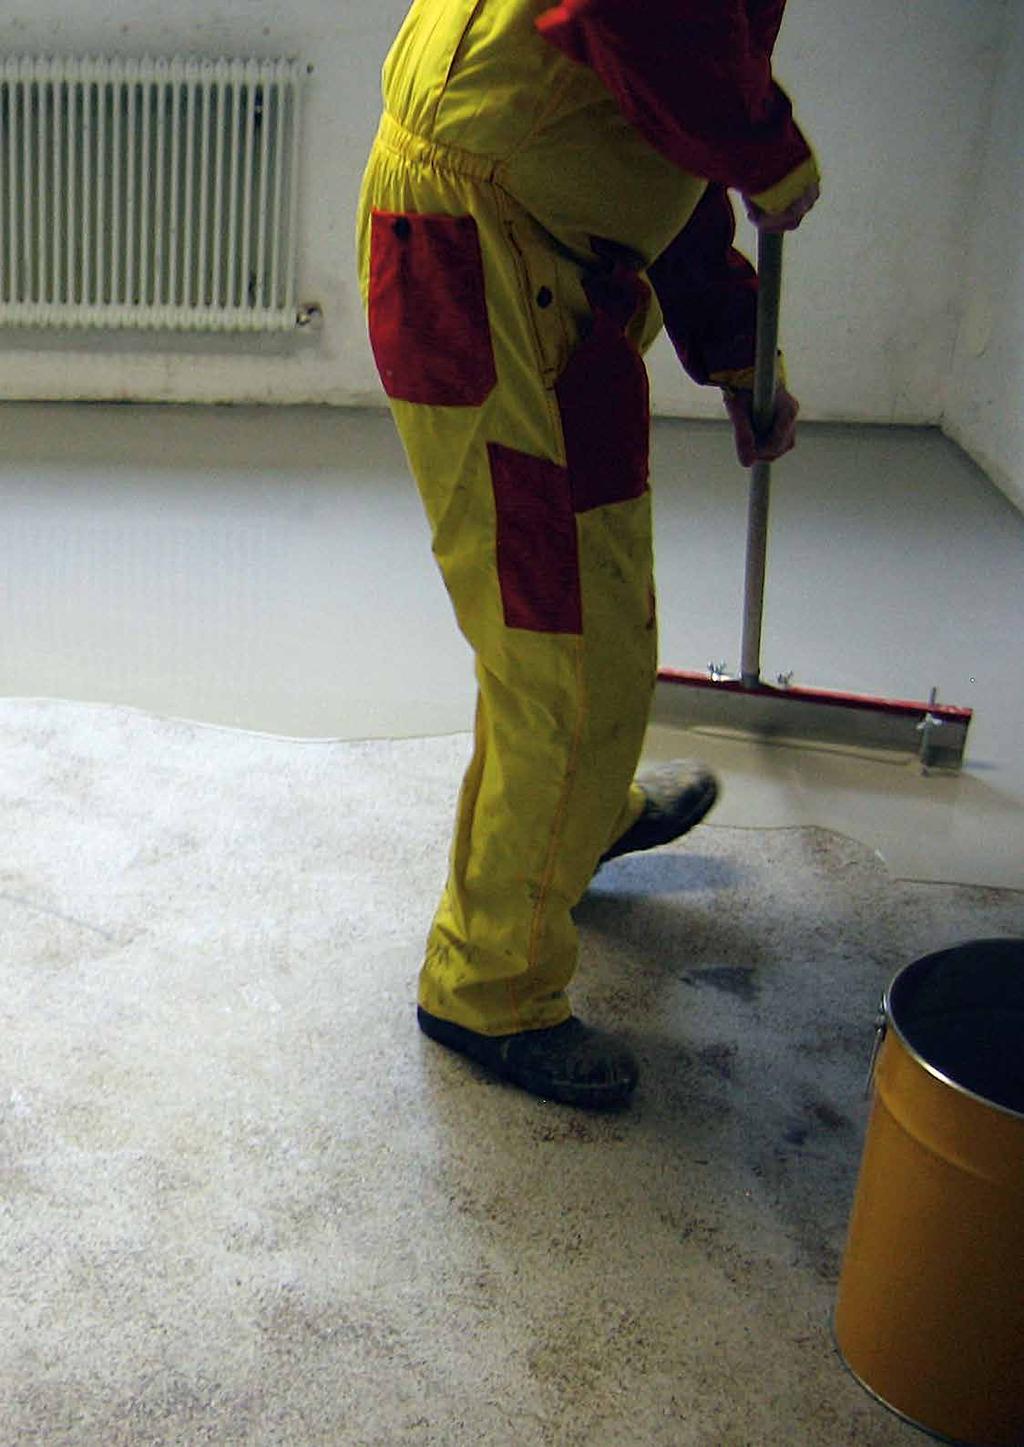 RELIABLE UNDERLAYMENTS MAKE A DIFFERENCE The quality of an underlayment can make all the difference between a smooth flooring system application and a troublesome one, a positive flooring experience